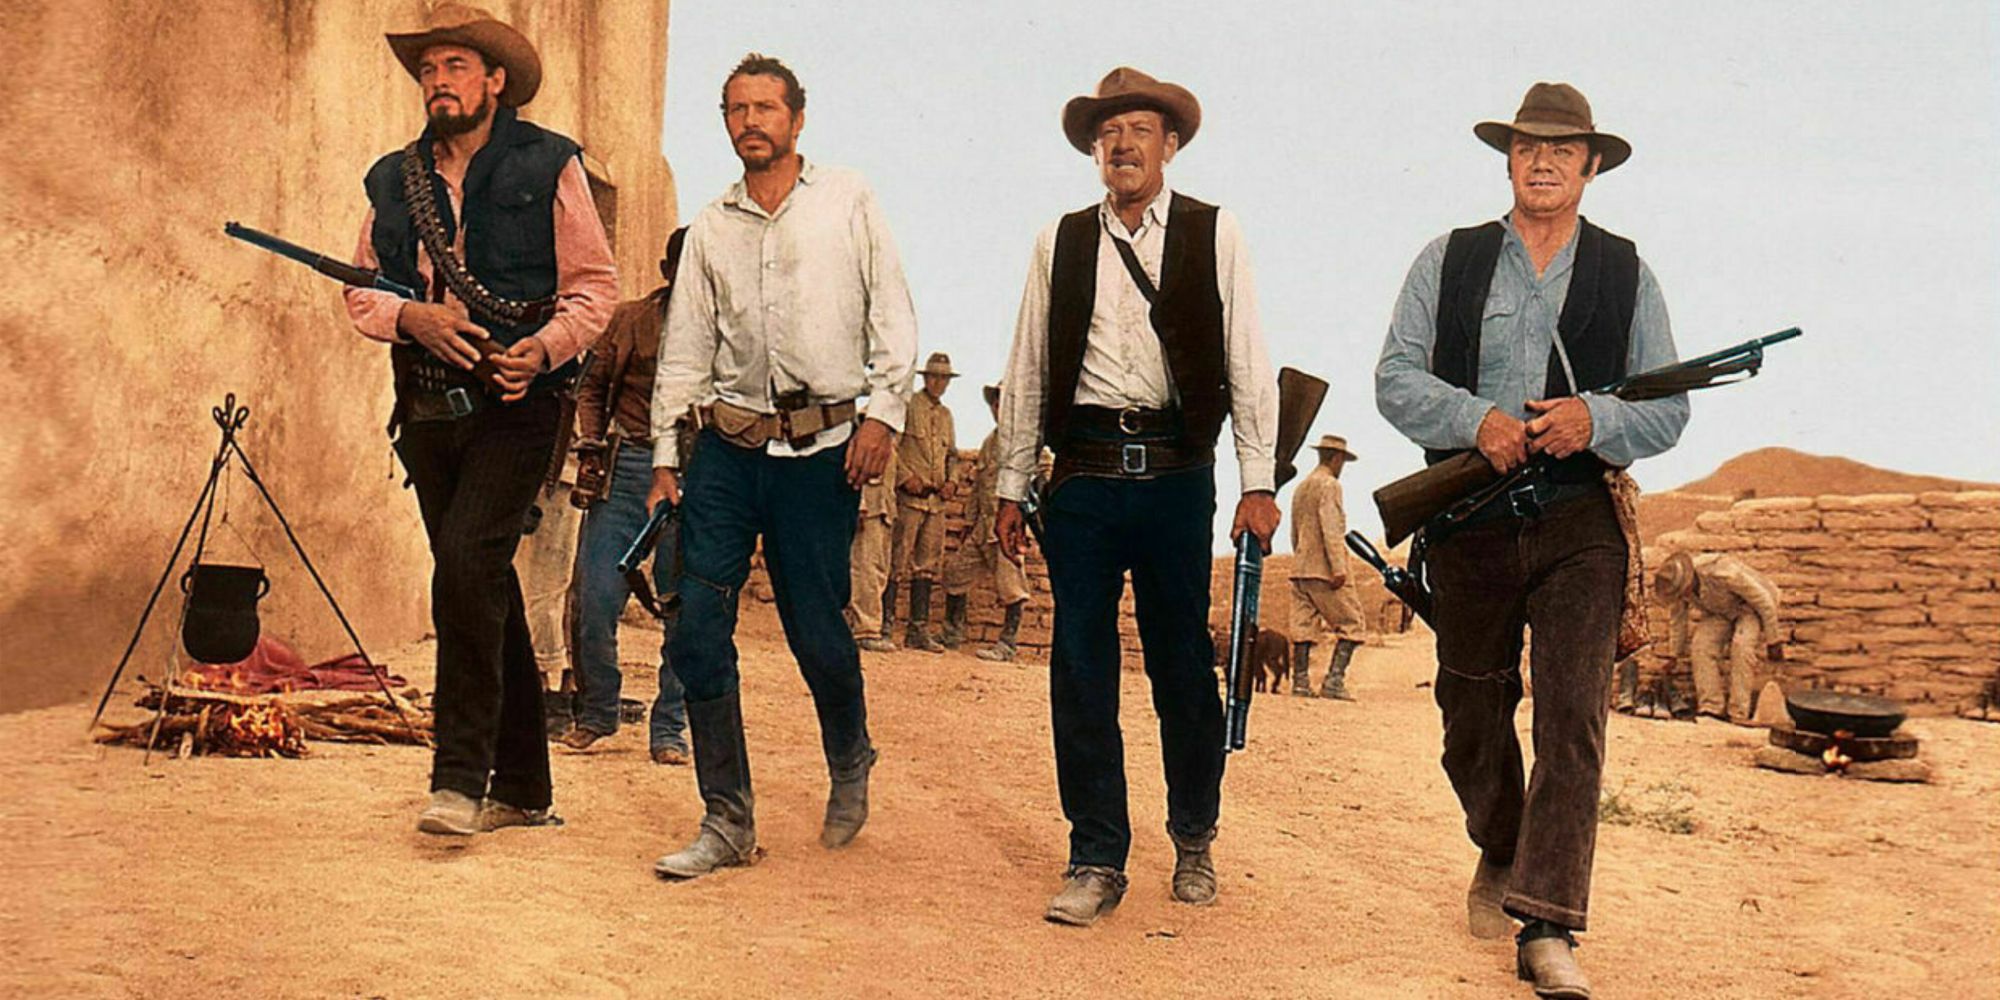 Four cowboys holding guns walking in the same direction in The Wild Bunch.